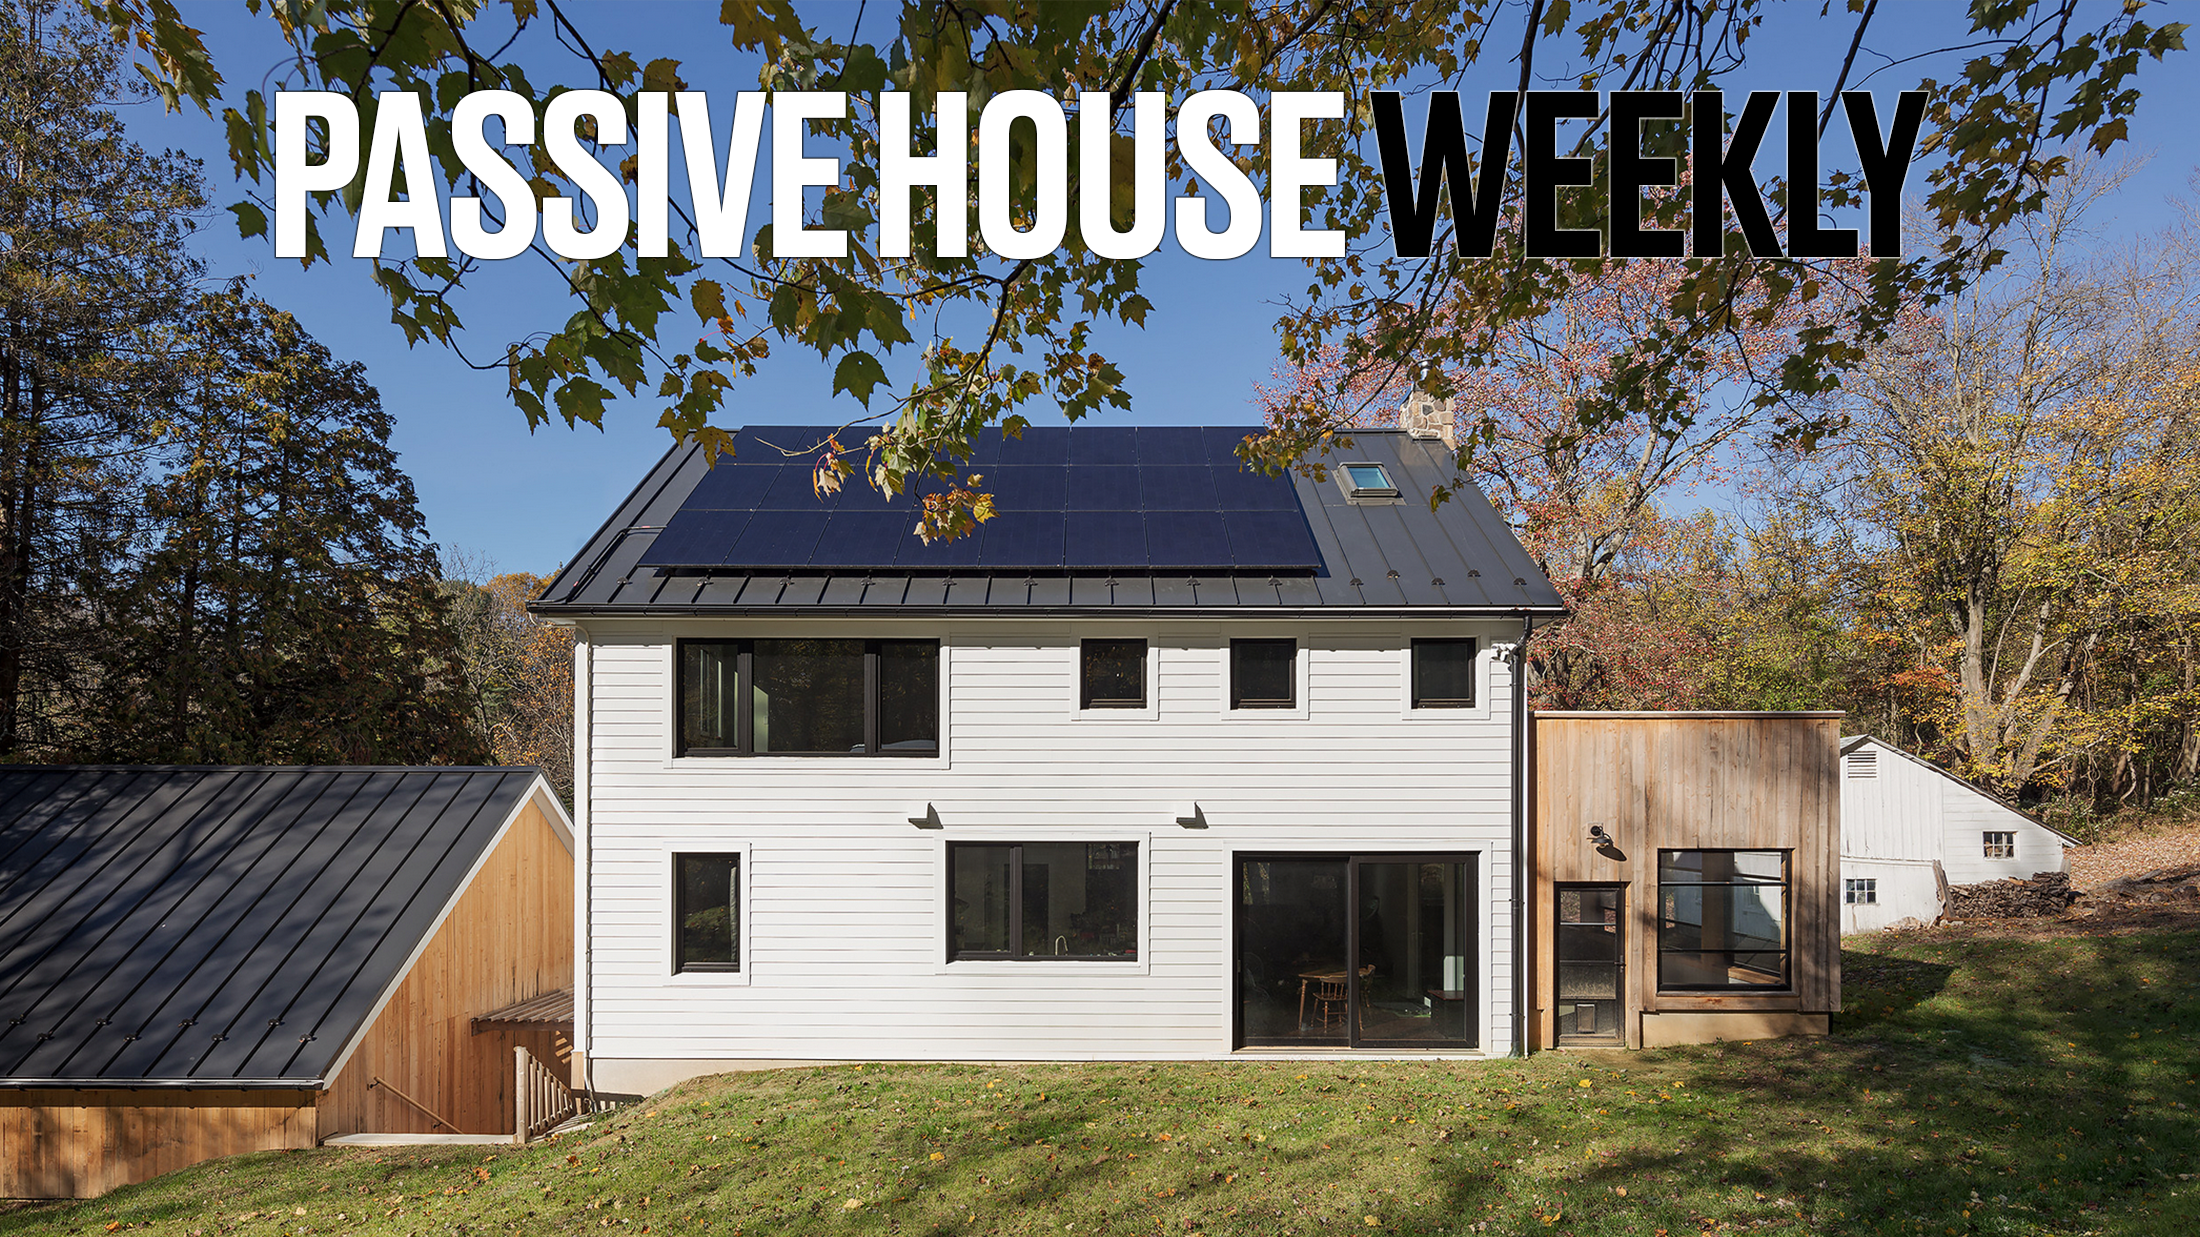 Passive House Weekly: July 11, 2022